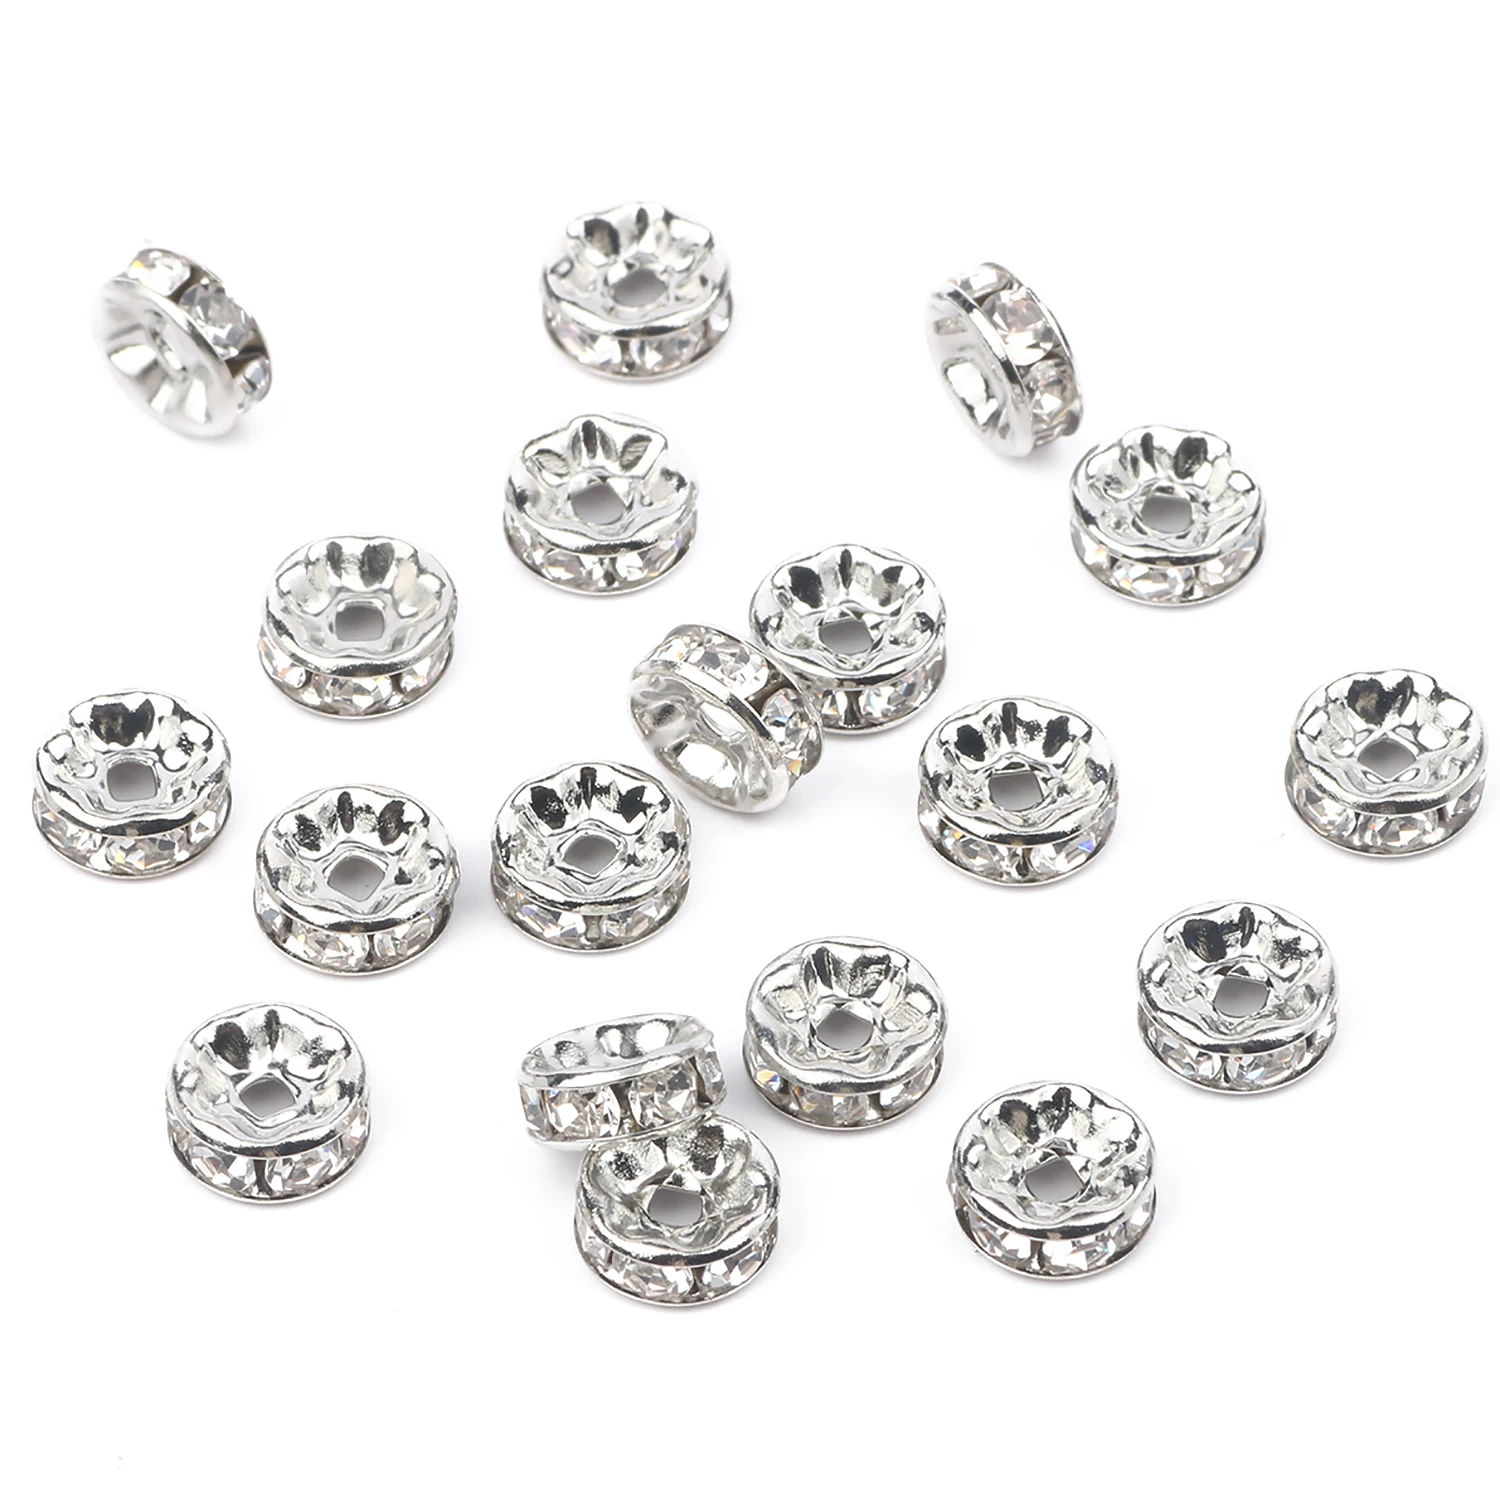 

Wholesale 50pcs/bag 4/6/8/10mm White K Color Crystal Rhinestone Rondelle Spacer Beads forJewelry Making